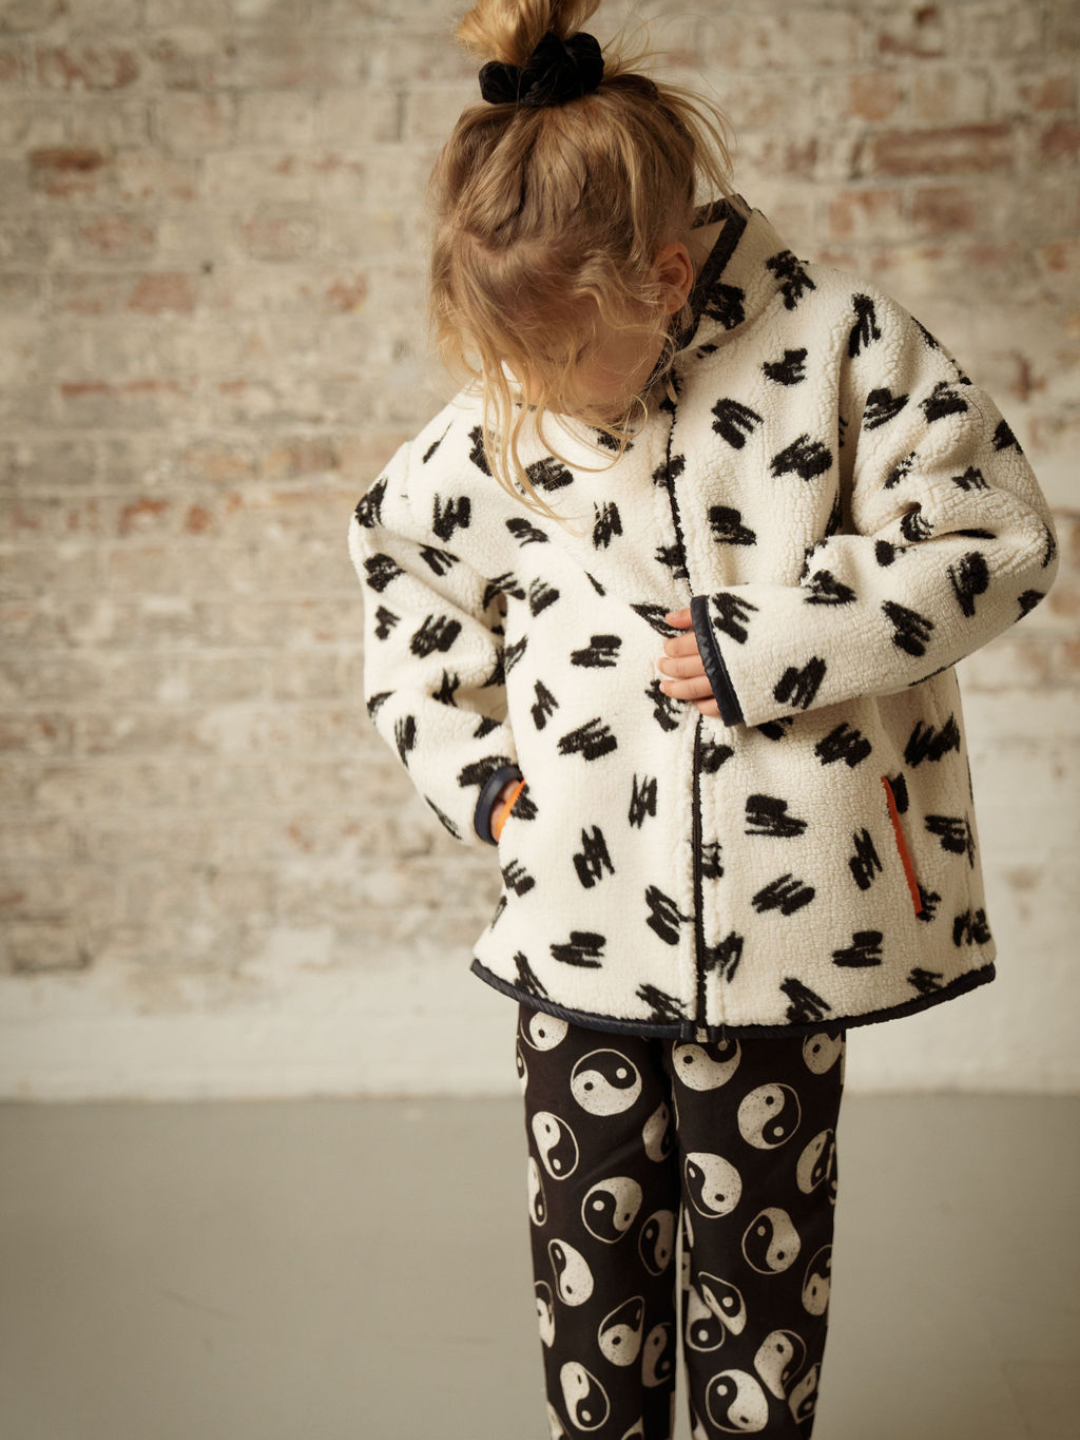 A child wearing a kids' jacket in a pattern of black scribbles on a cream background, with black bindingon cuffs and hem, orange binding on pockets